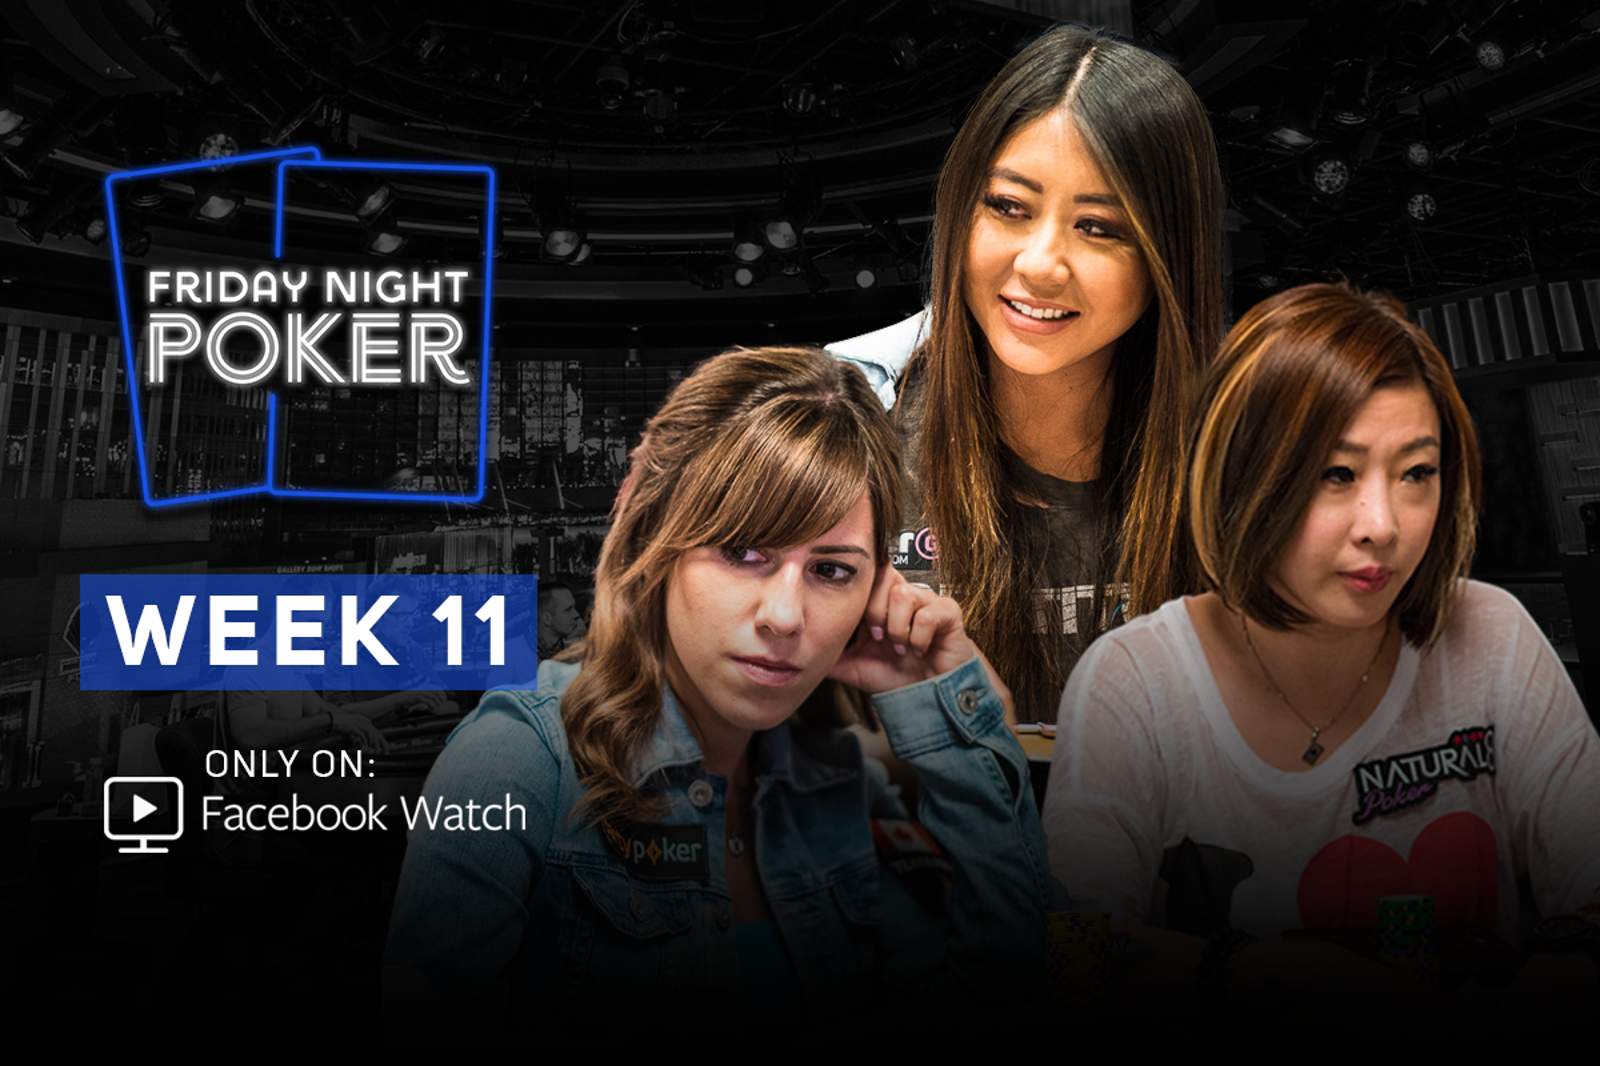 Maria Ho and Kristen Bicknell Make Their Friday Night Poker Debut in Week 11